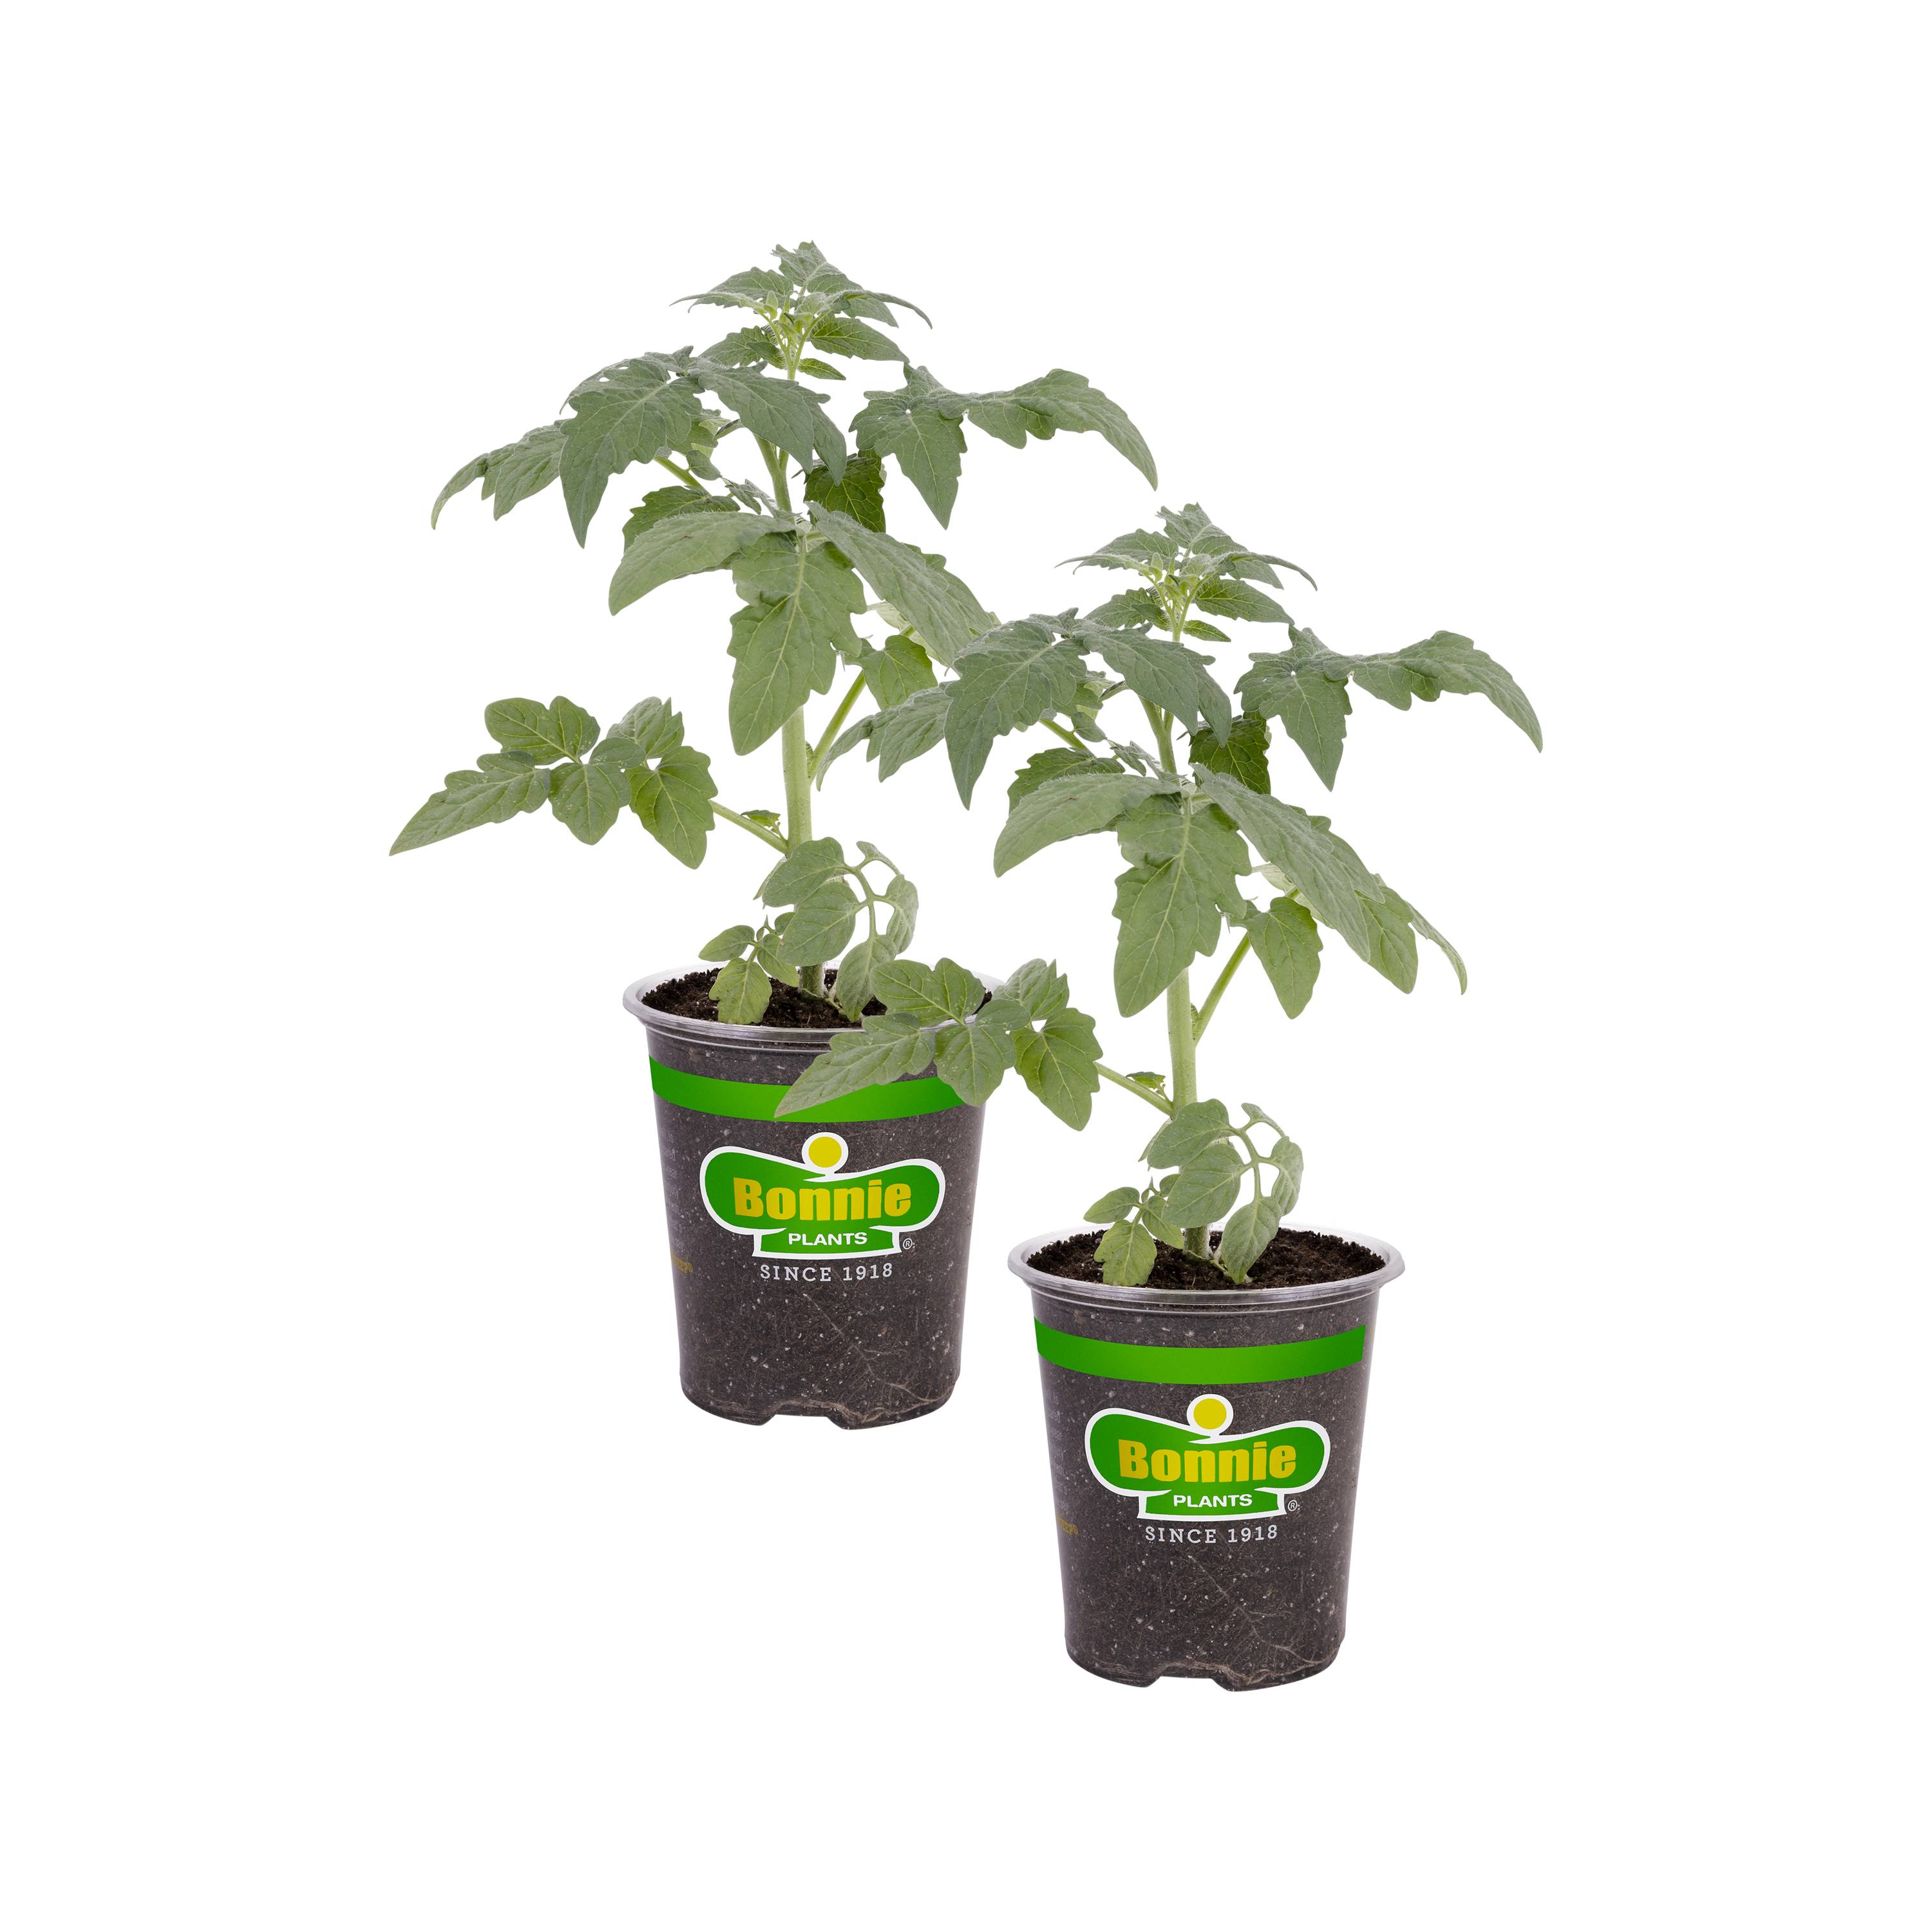 Lowe's Tomato Assortment Plant in the Vegetable Plants department at